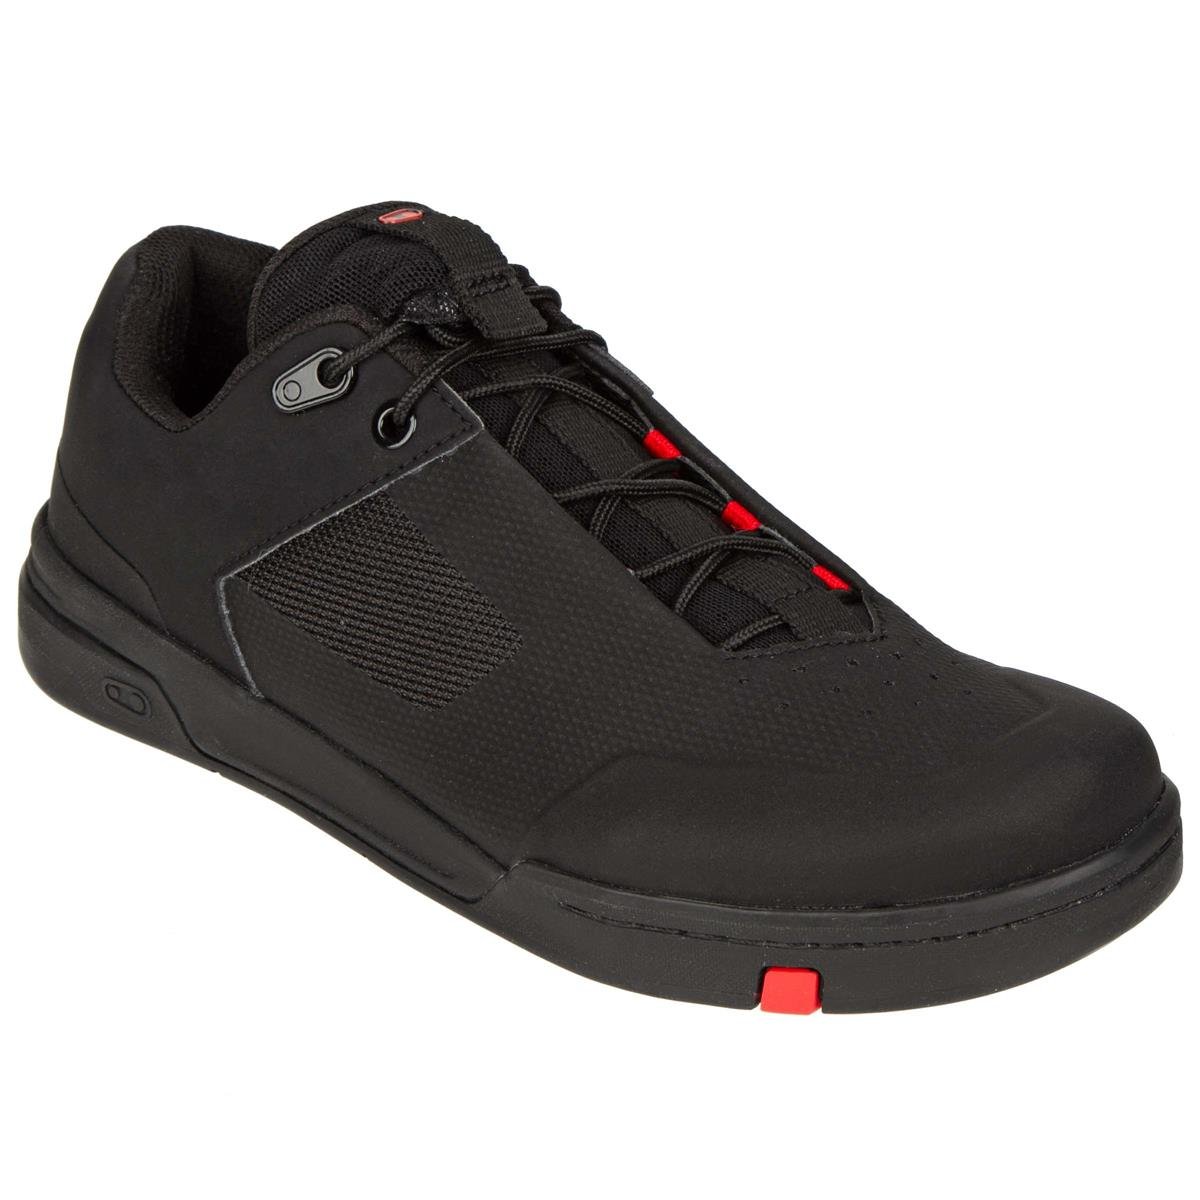 Crankbrothers Chaussures VTT Stamp Lace Noir/Rouge